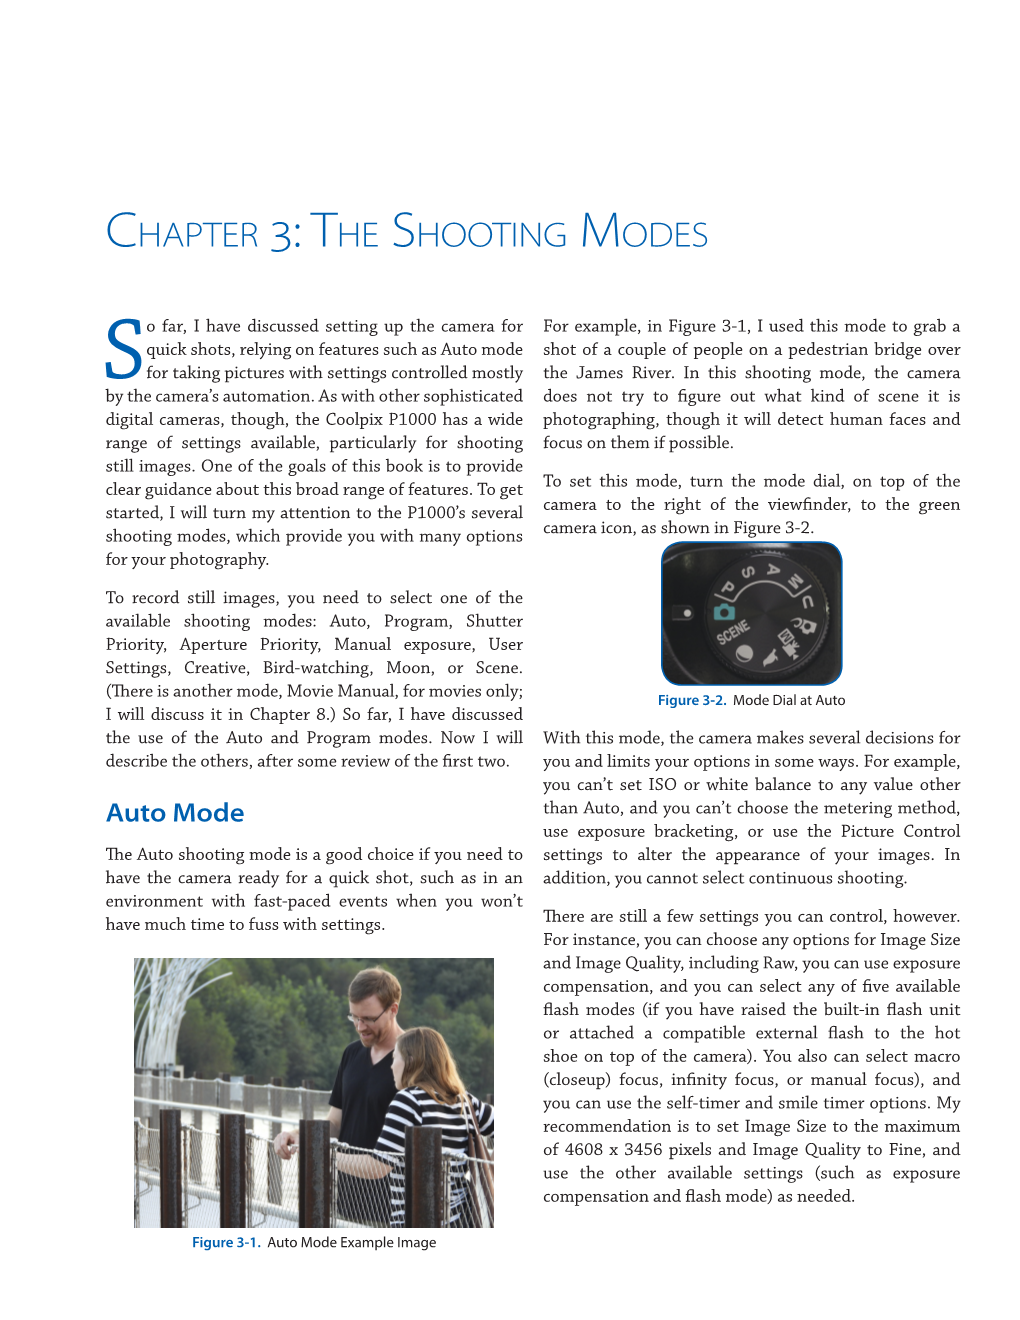 The Shooting Modes